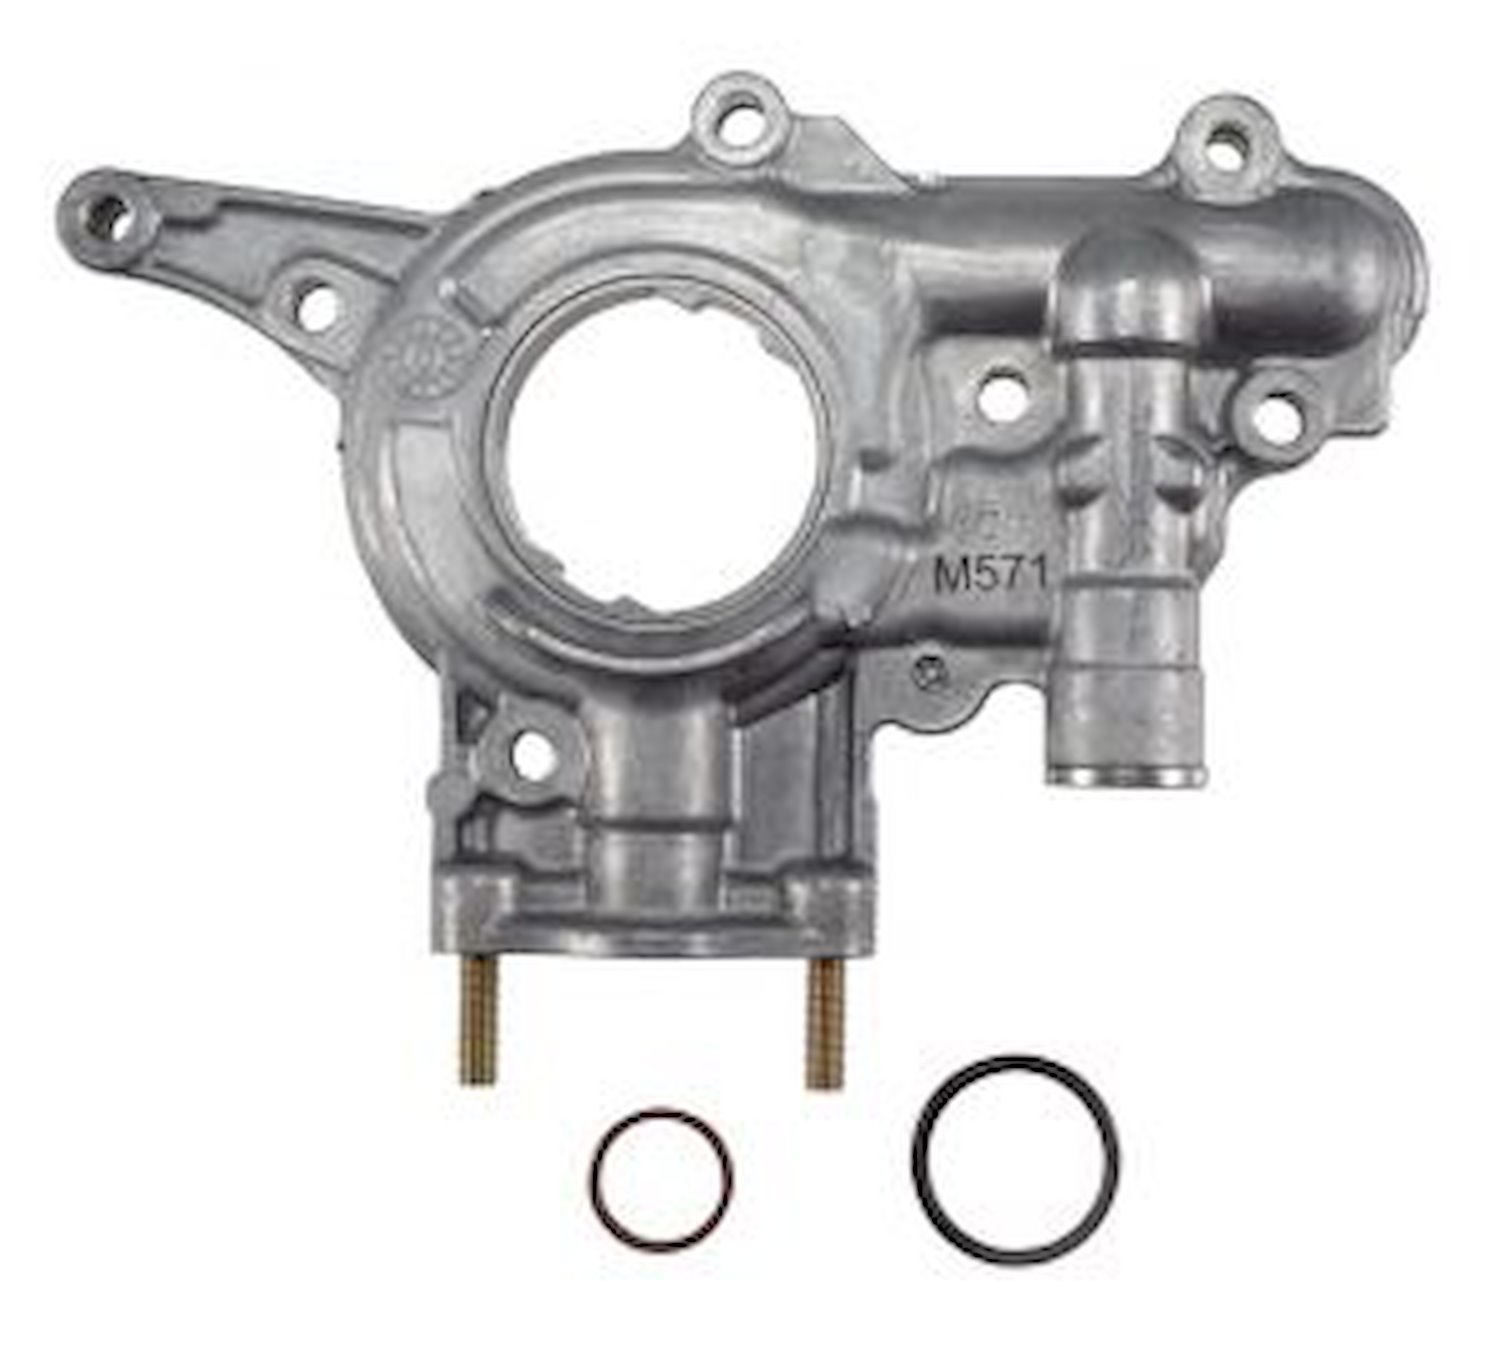 Oil Pump Fits Select Honda Clarity, Fit, Insight 1.5L L4 Engines Only